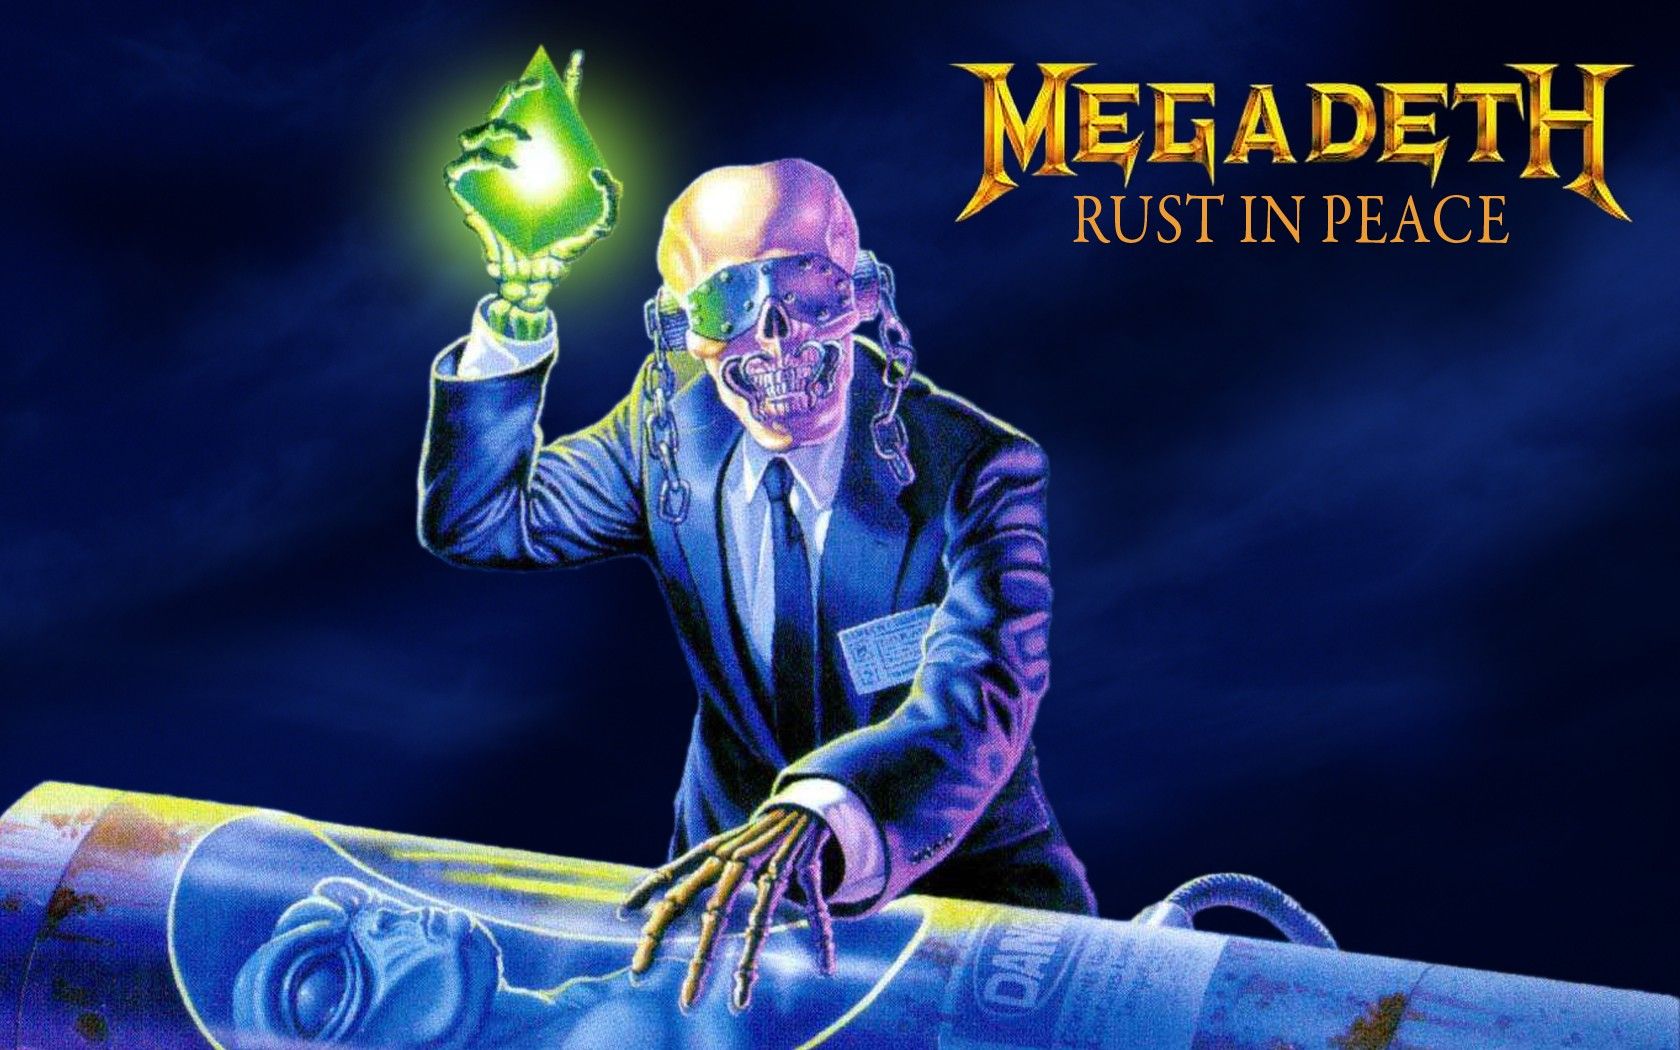 Wallpaper, band, metal music, 90s, heavy metal, thrash metal, Rust in Peace, Vic Rattlehead, Megadeth, Big Dave Mustaine, performance, stage 1680x1050